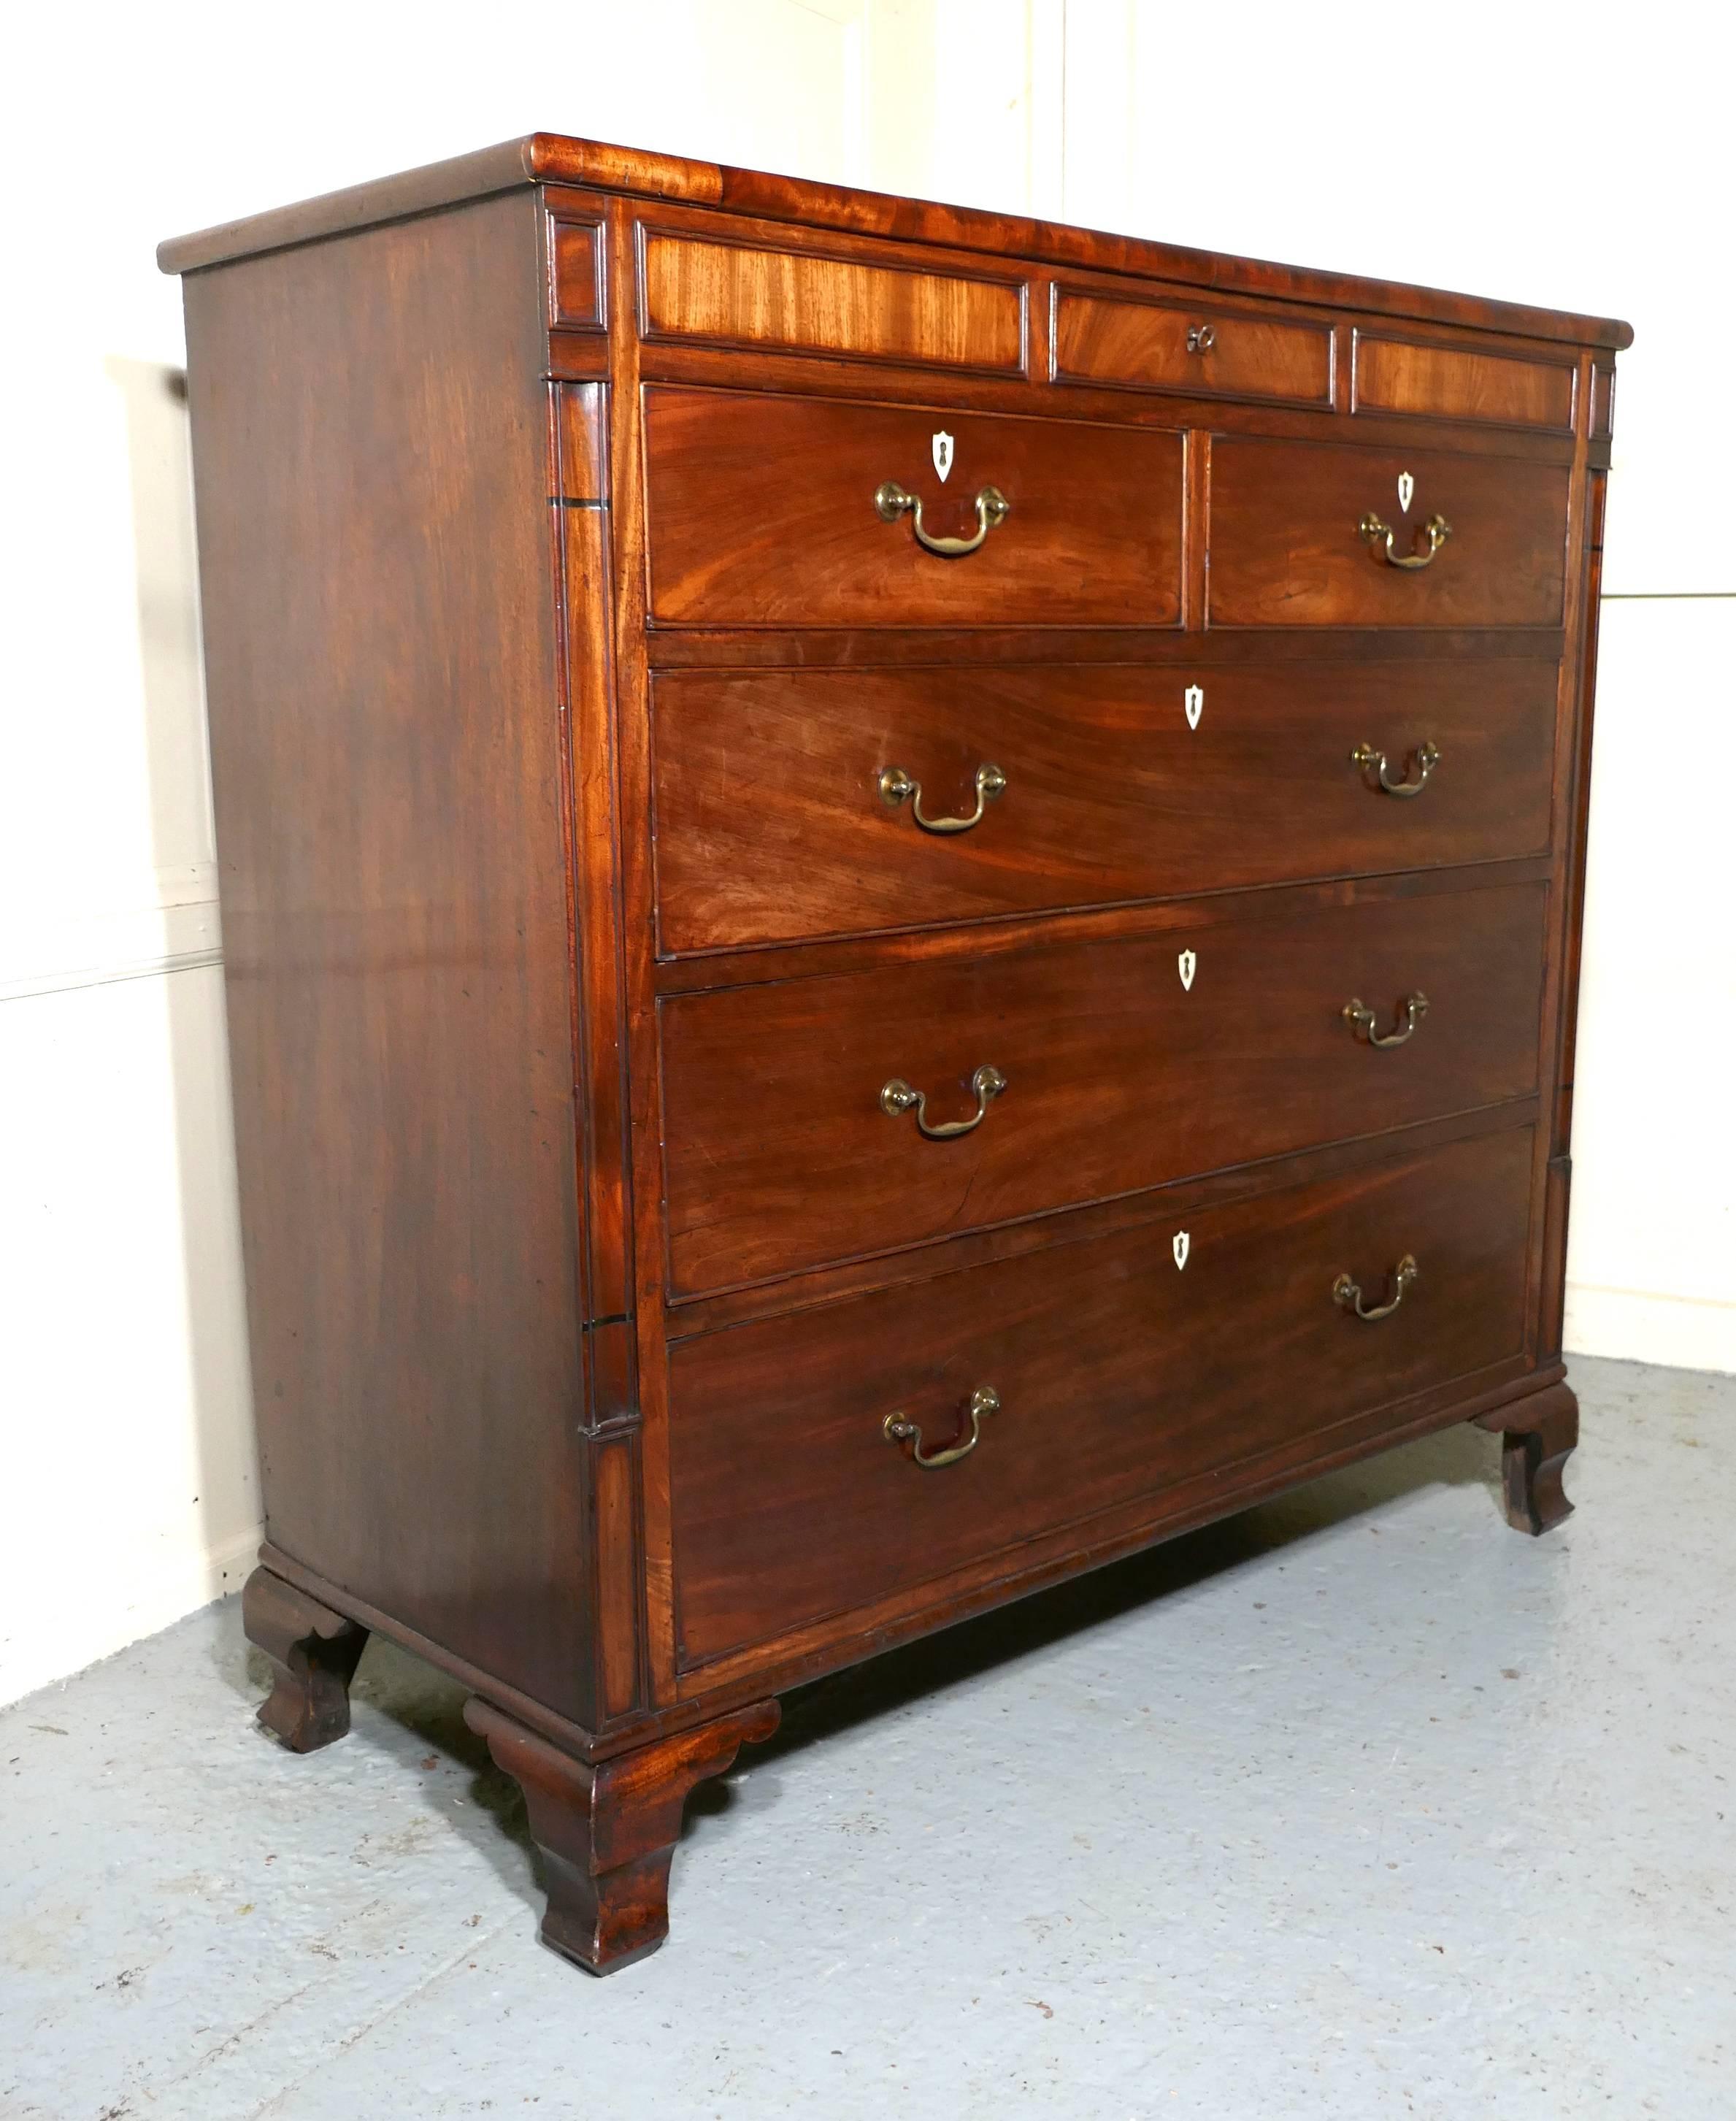 A Large William IV  Flame Mahogany Chest of Drawers

The chest has two short drawers near the top and three graduated long drawers beneath, there is also a small jewellery drawer in the centre top
The chest is made with beautiful matched Flame